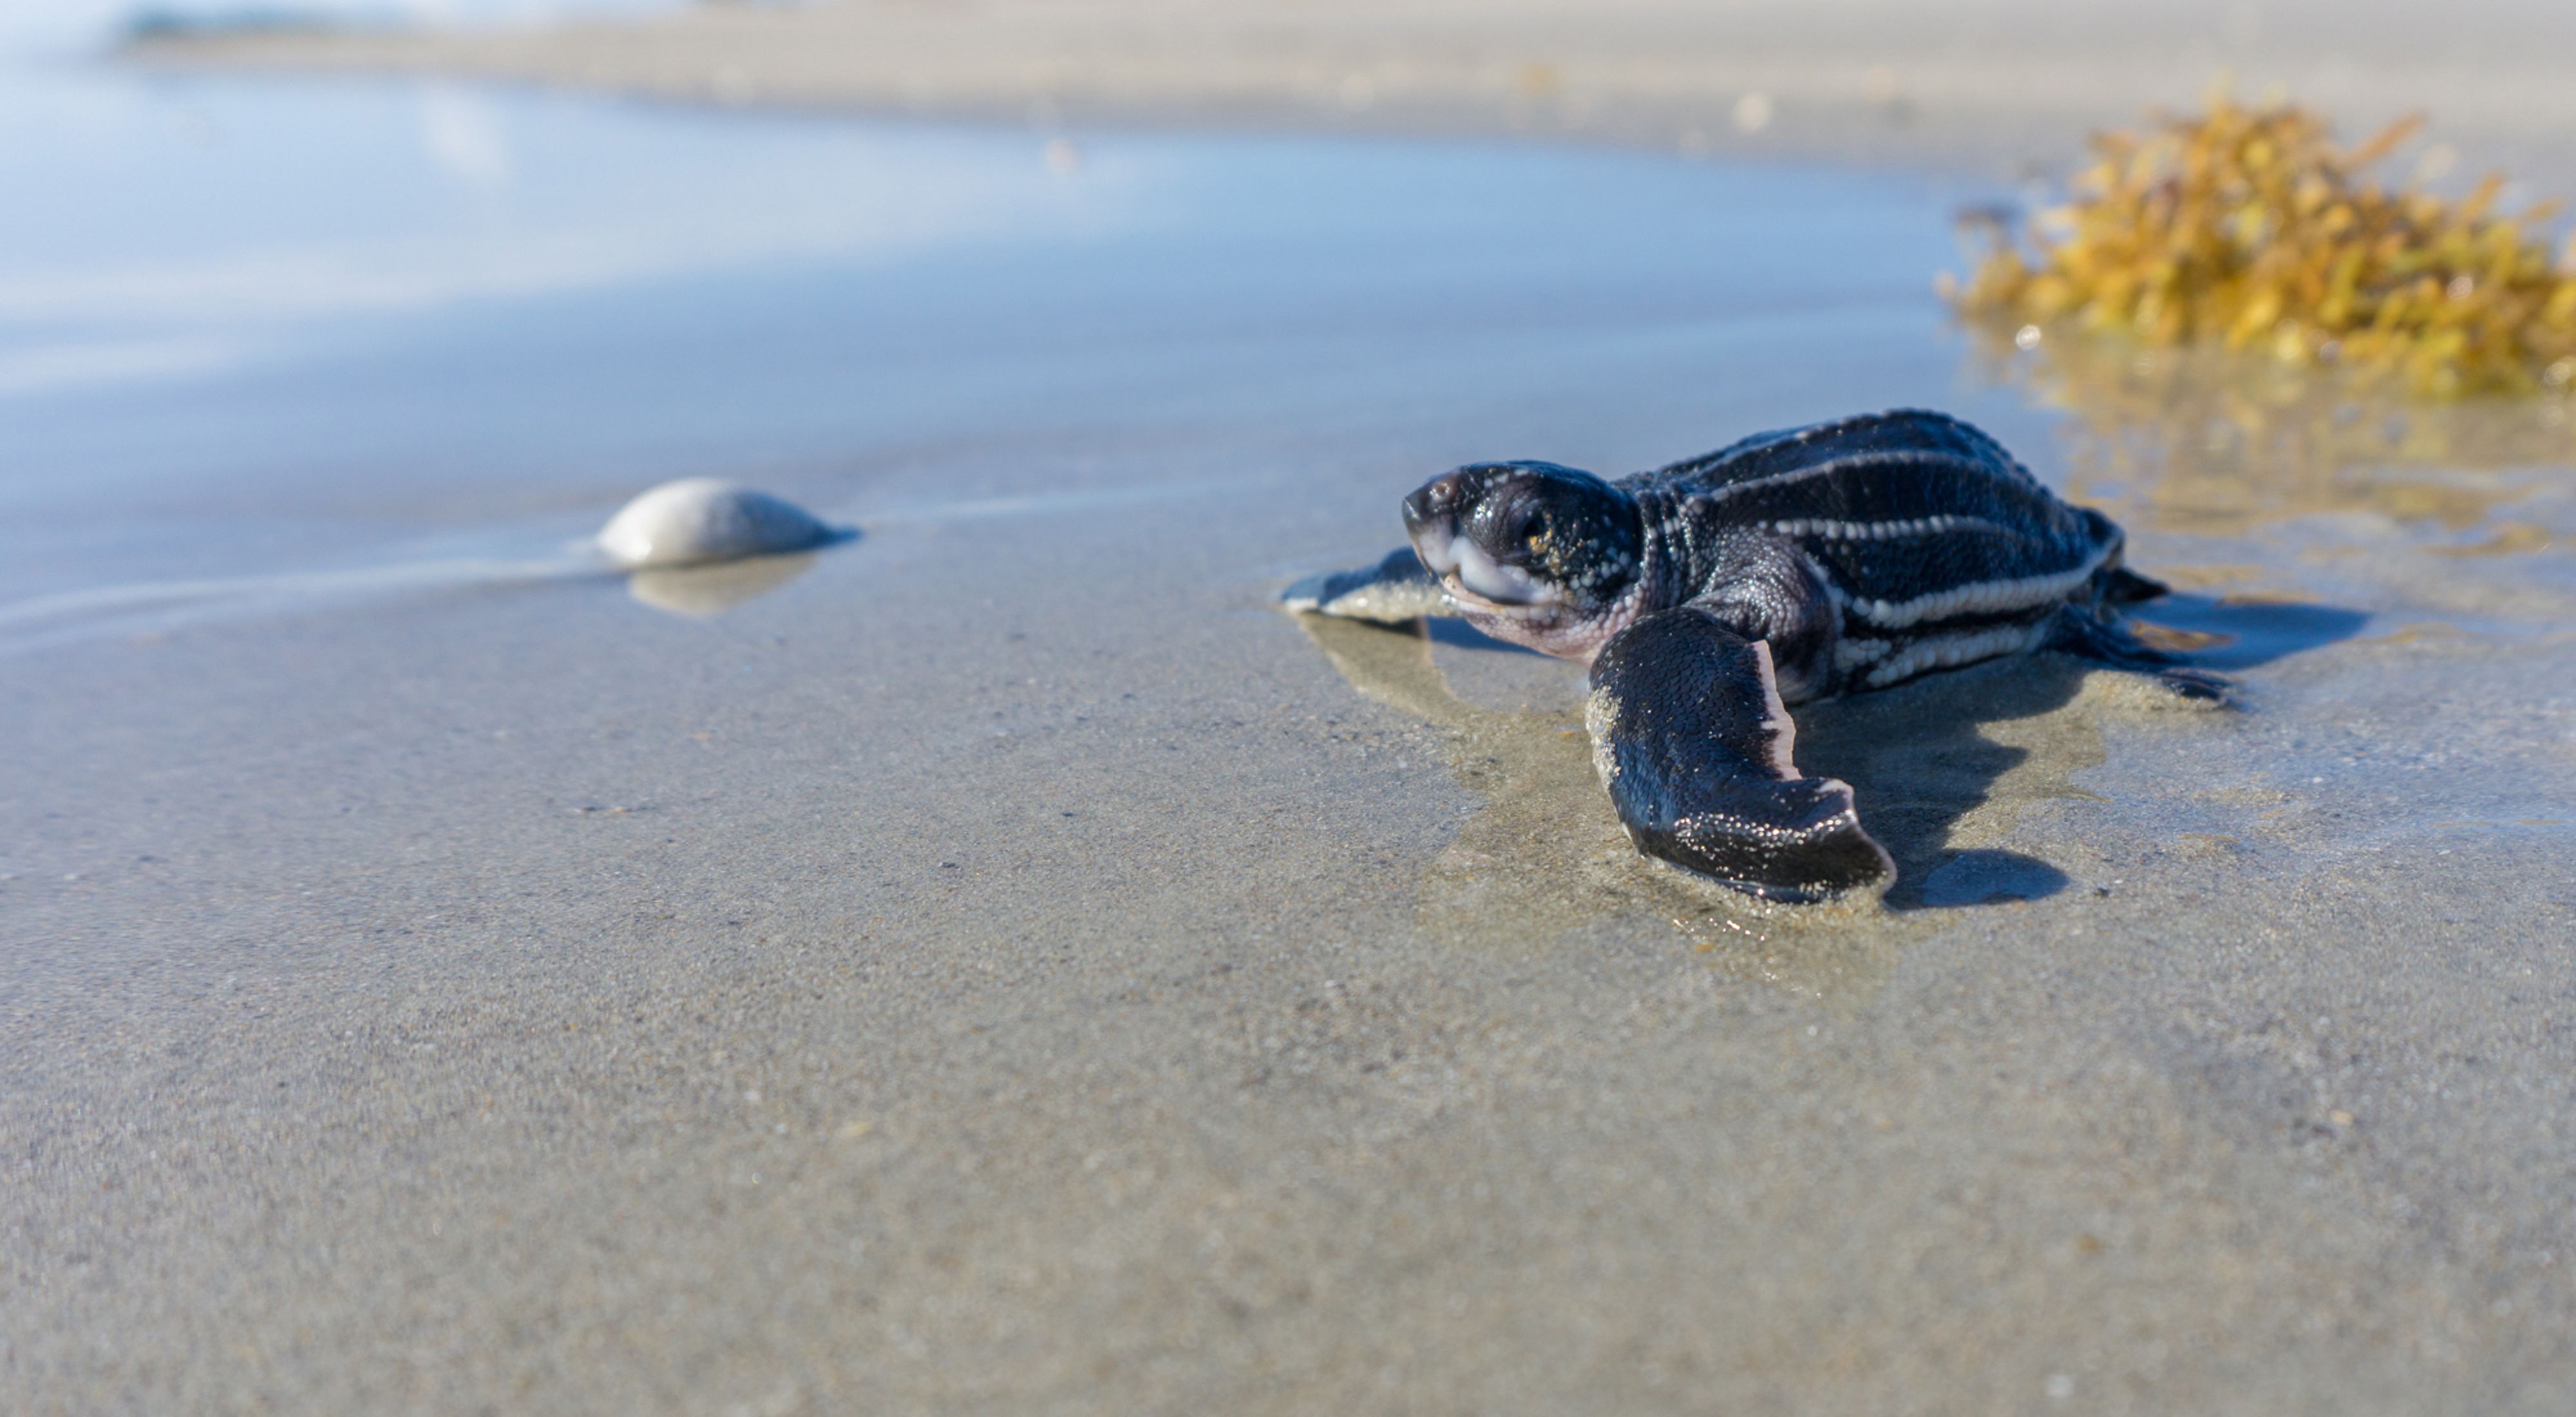 A hatchling leatherback turtle moves across wet sand.